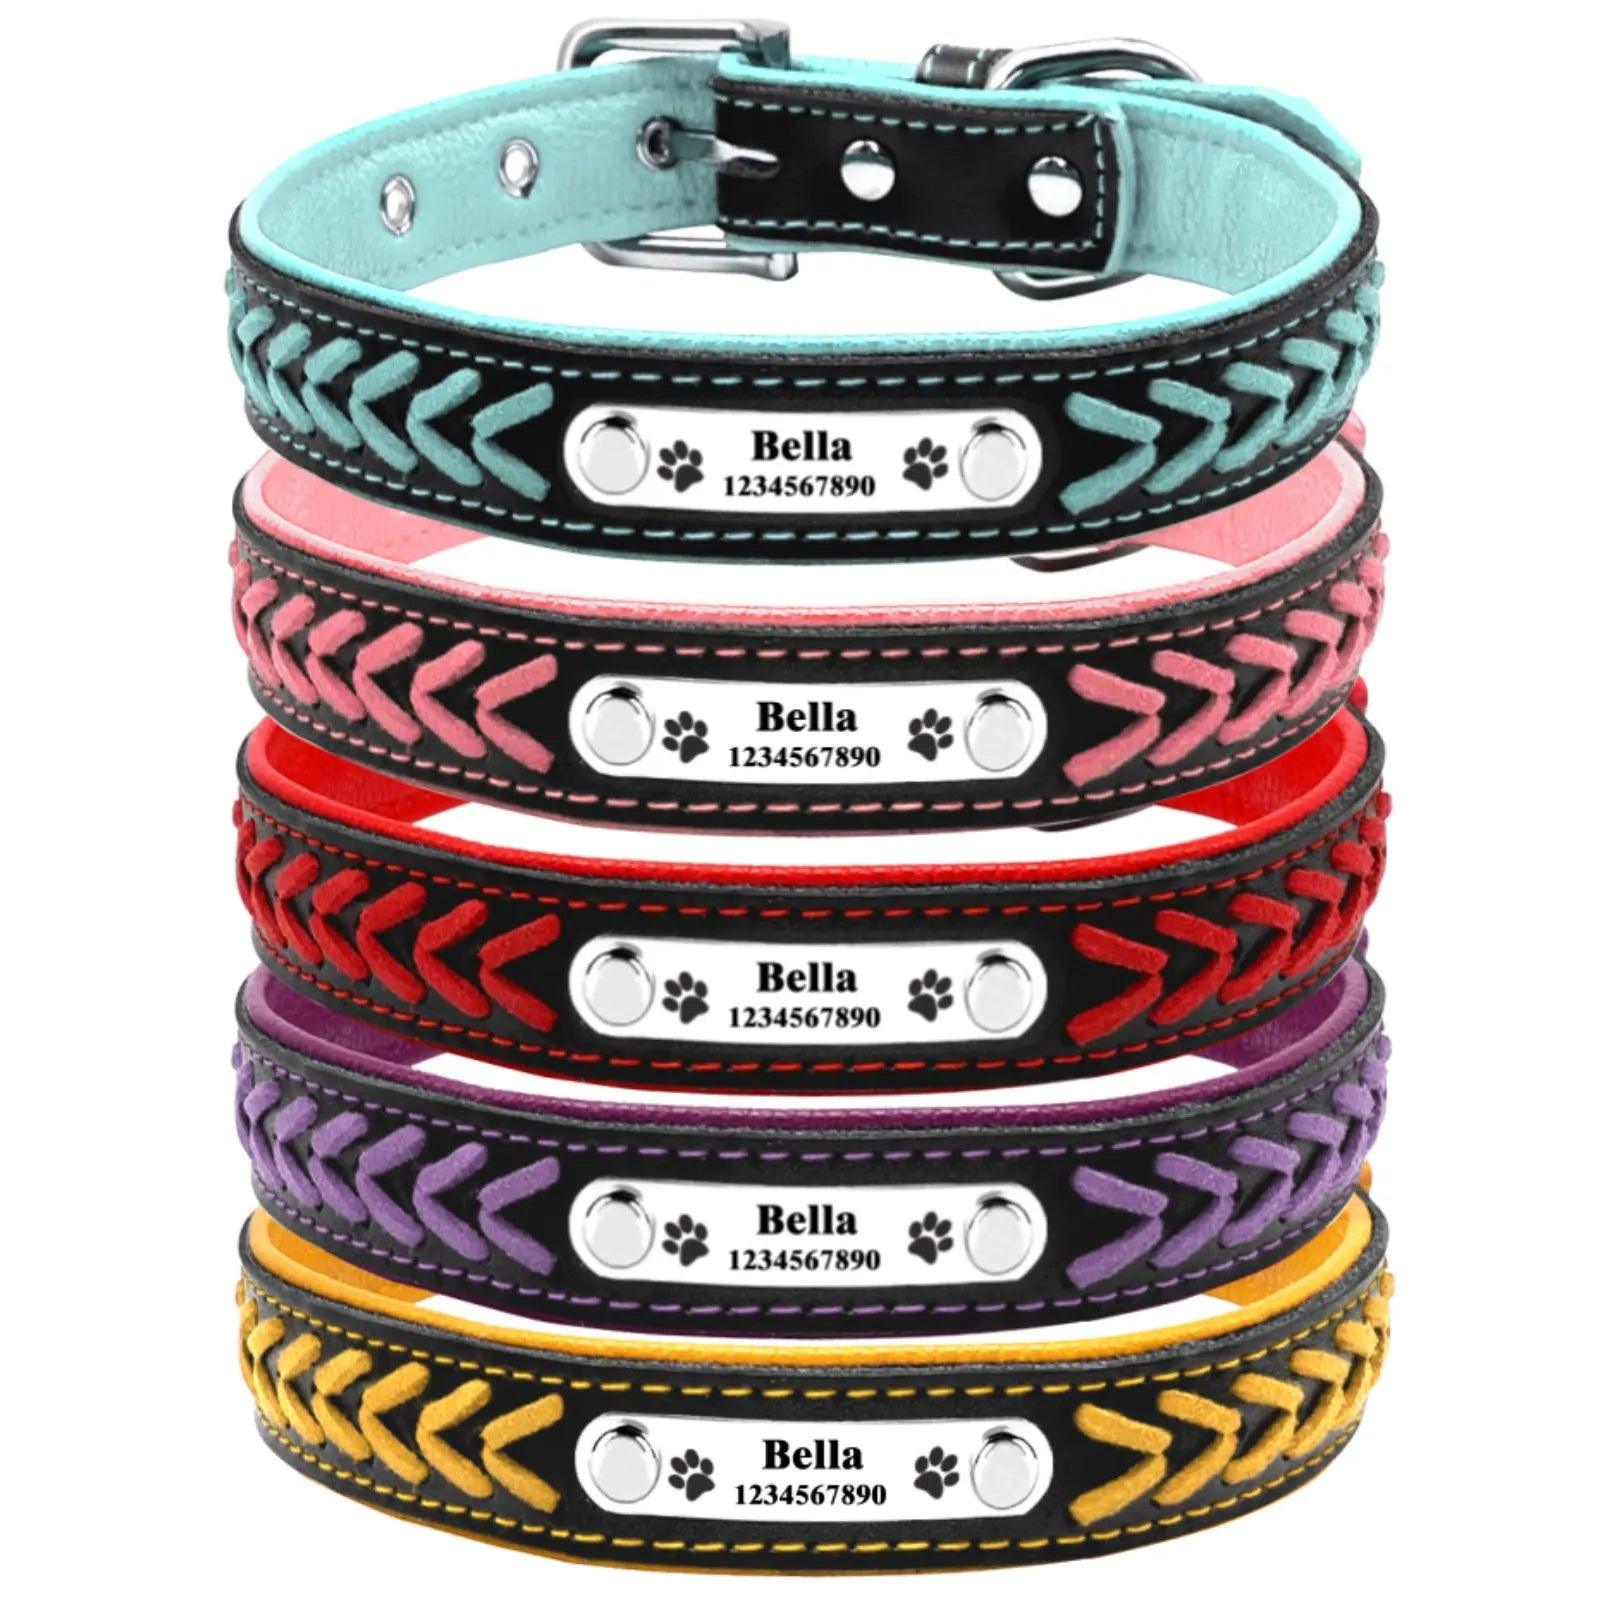 Personalized Leather Dog Collar with Custom Engraving - Adjustable for Small to Large Breeds  ourlum.com   